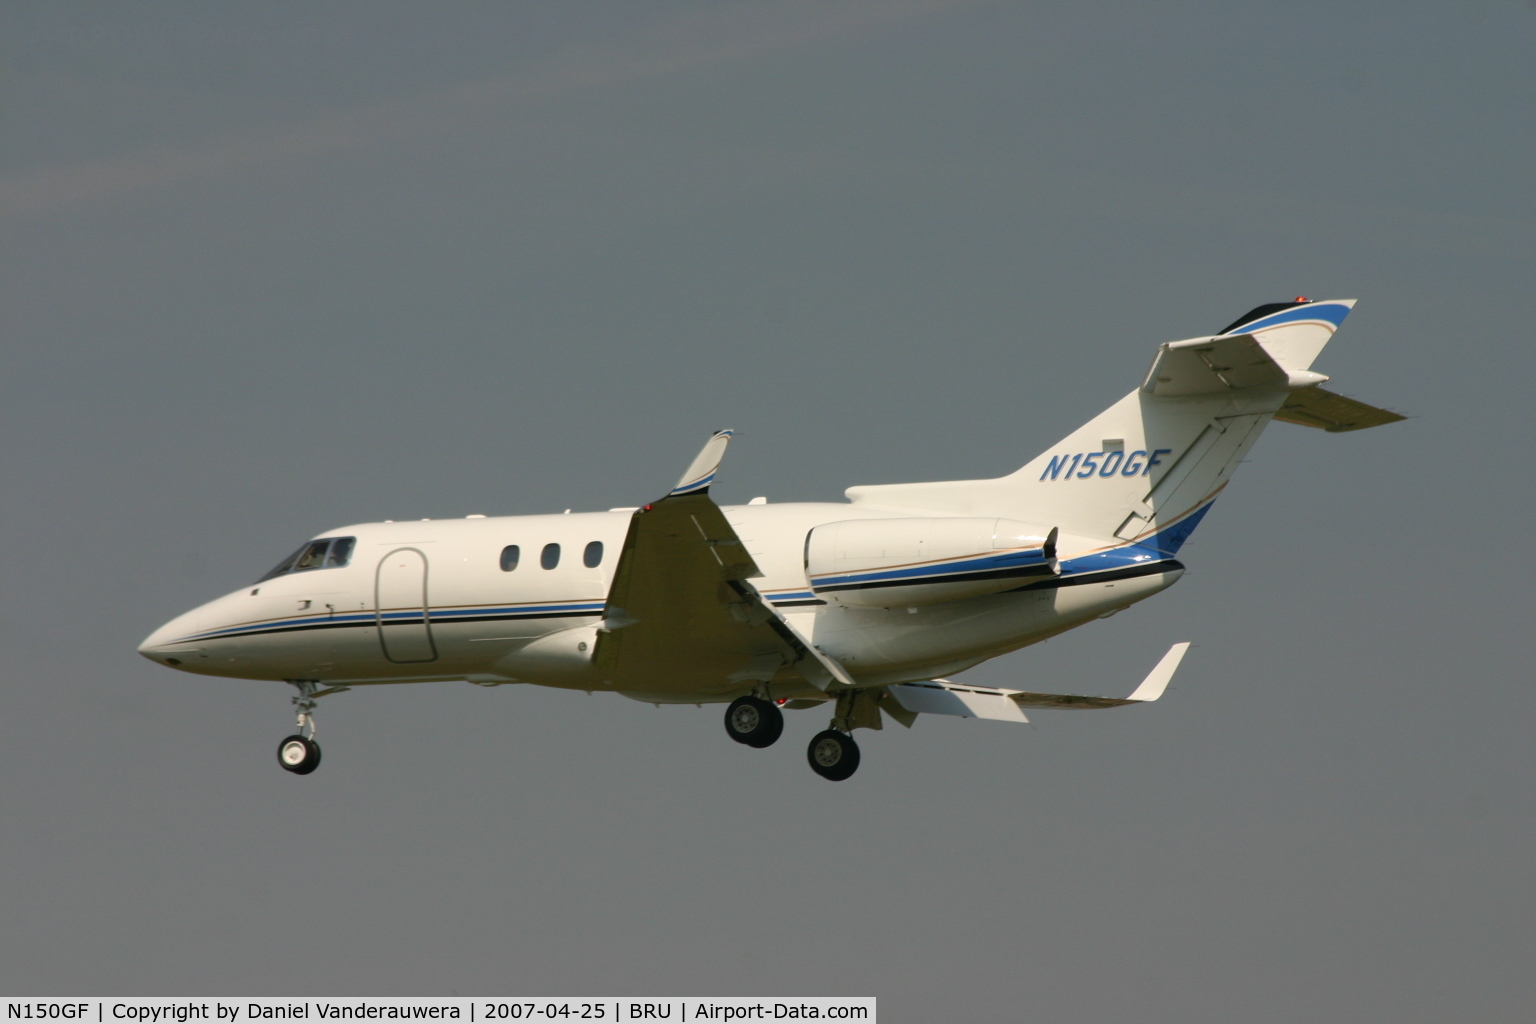 N150GF, 2006 Raytheon Hawker 850XP C/N 258823, do not worry for the spotters, this (private) dog is not dangerous